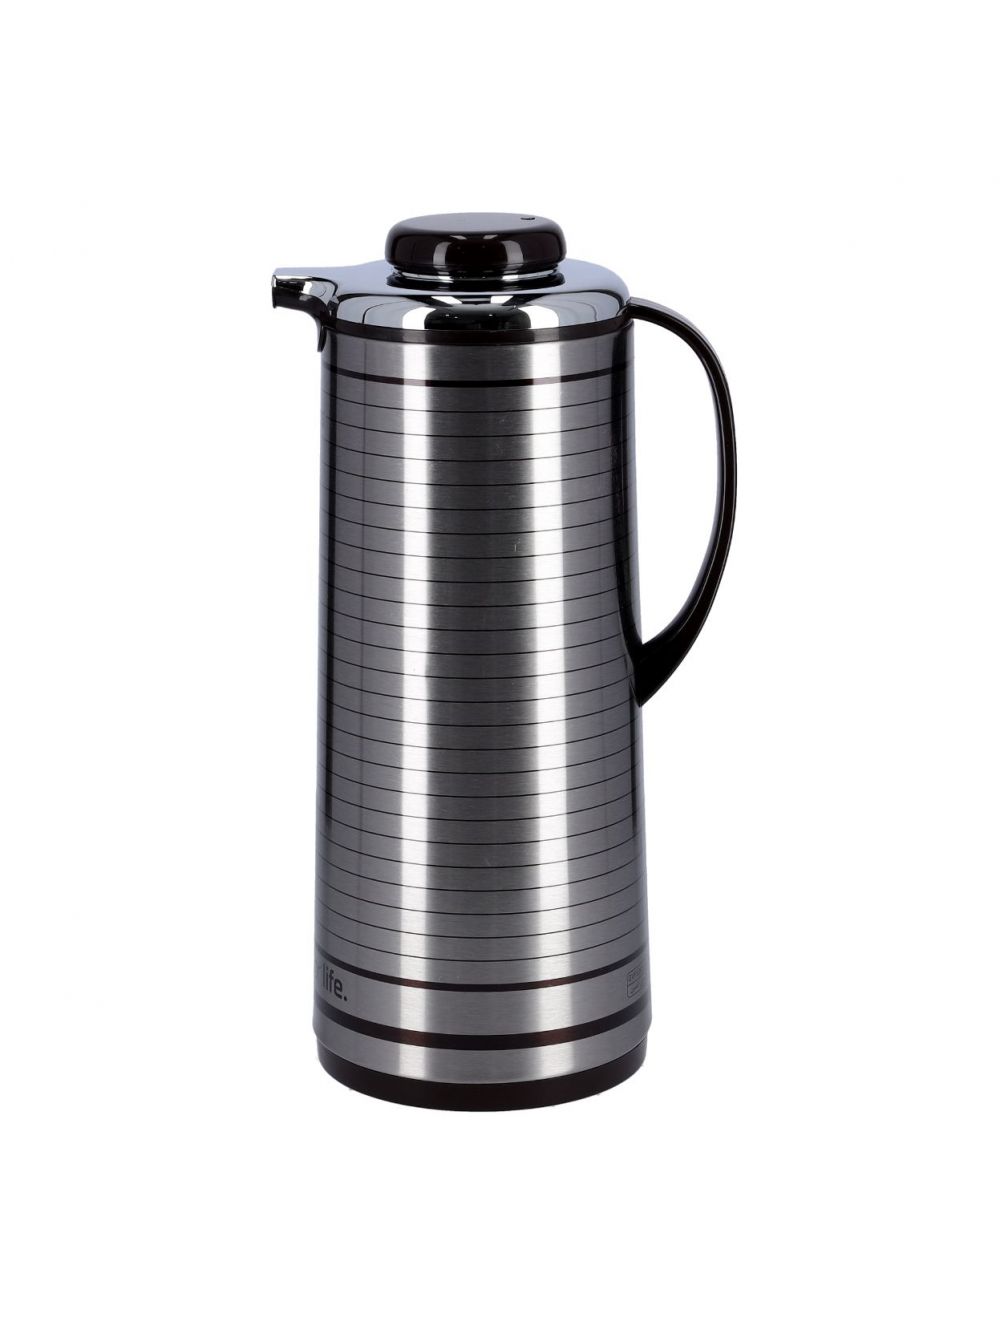 Geepas GVF5260 1.3 Litre Hot and Cold Vacuum Flask